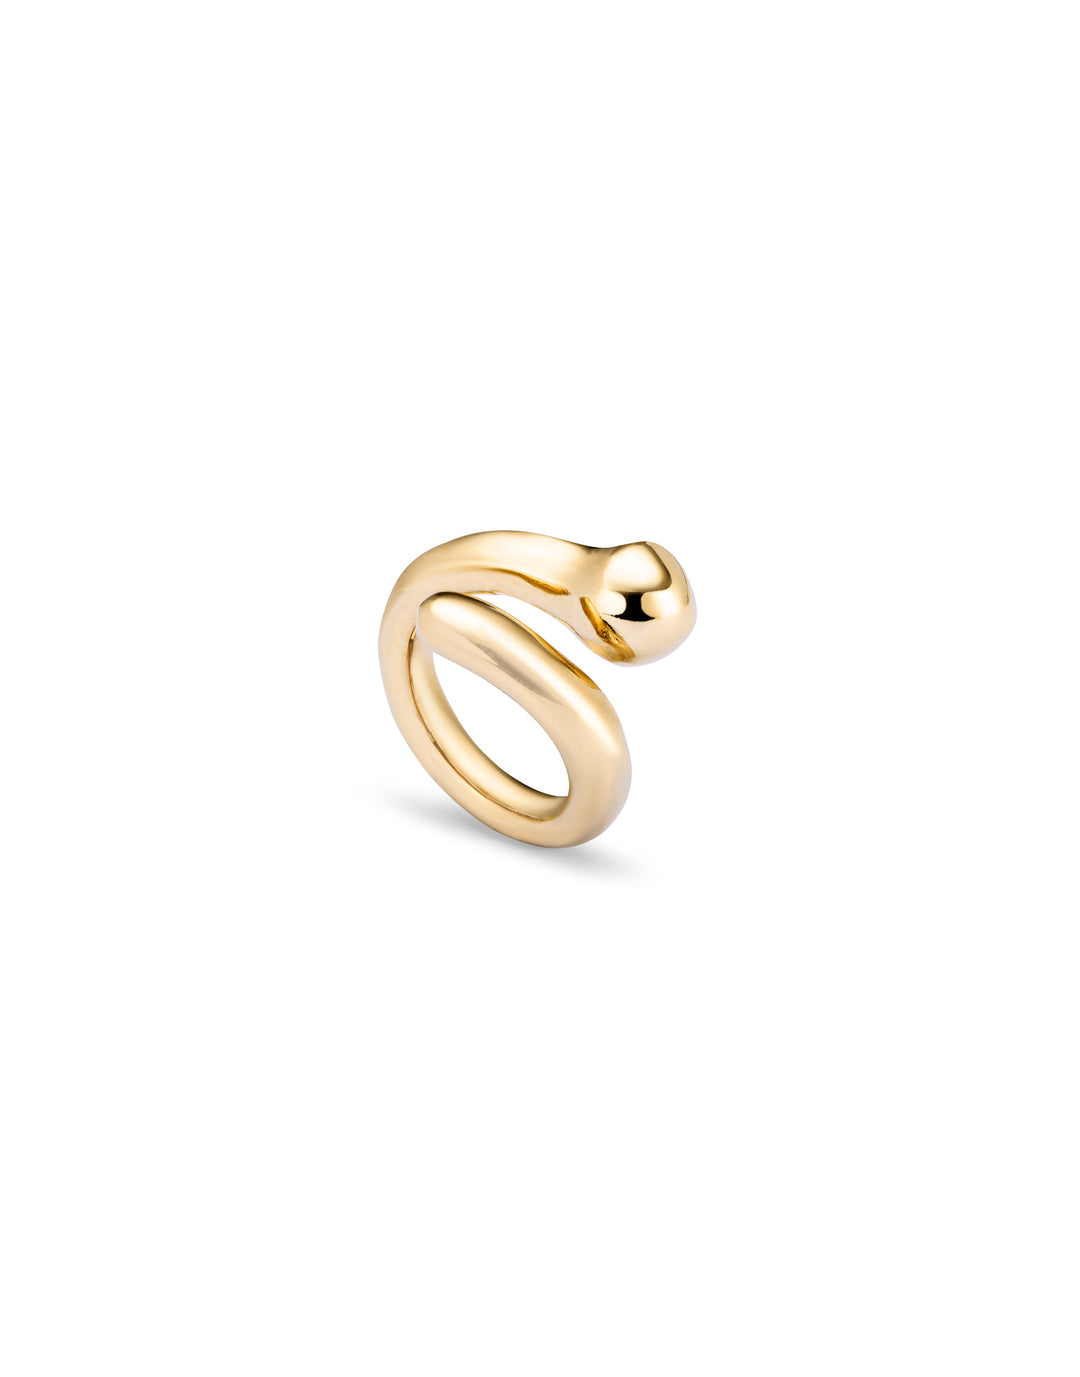 COMEBACK RING-GOLD - Kingfisher Road - Online Boutique